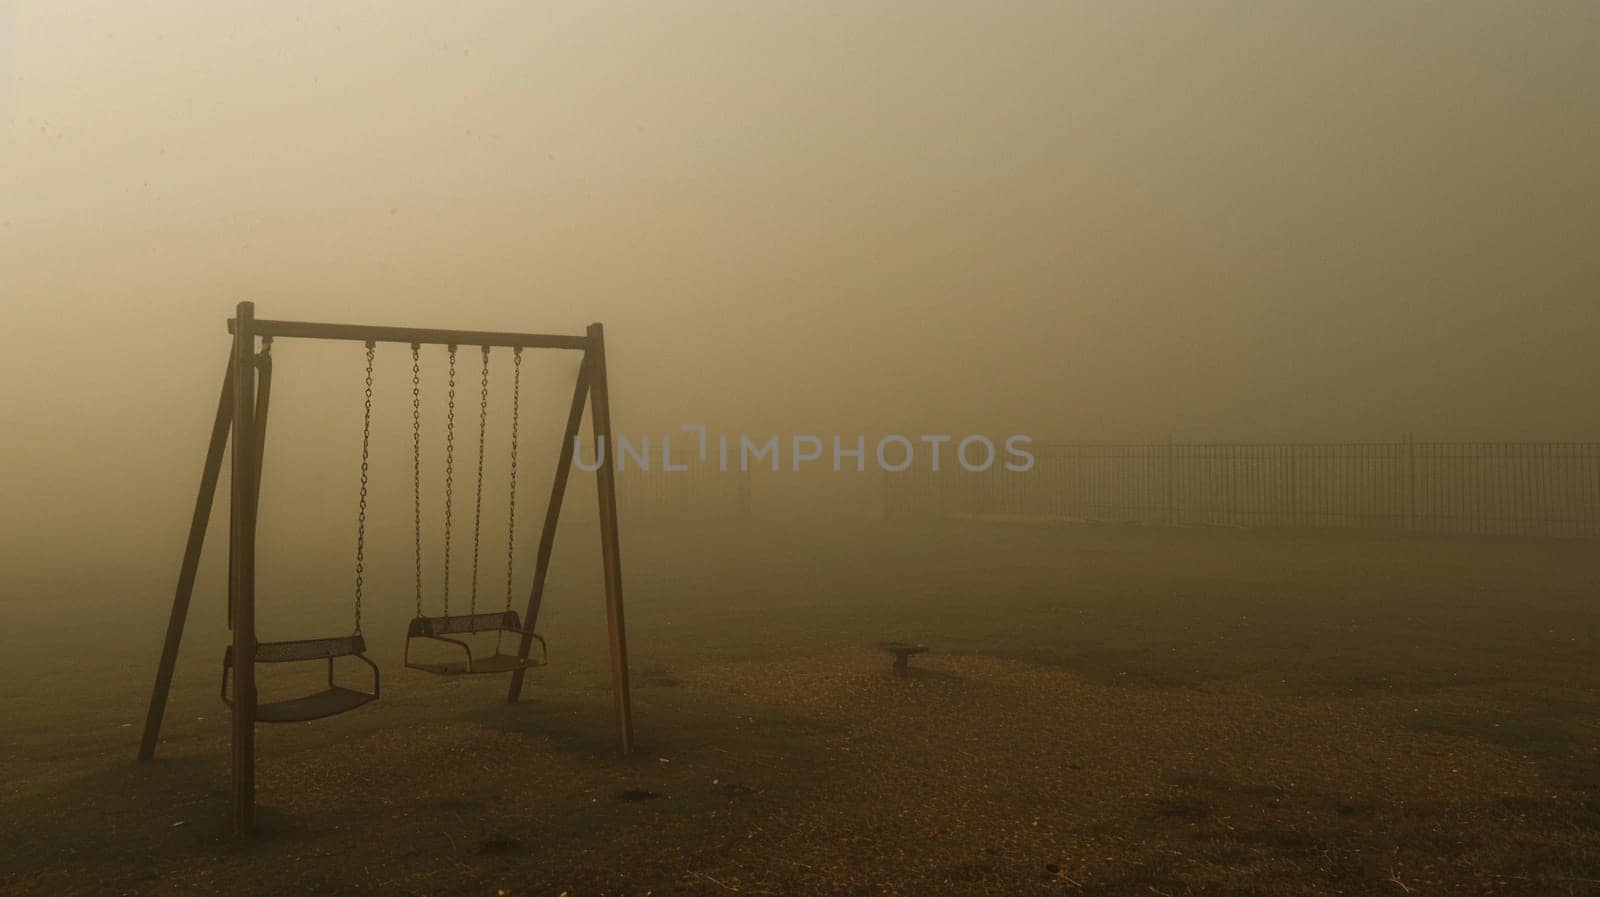 A haunting image of a playground overtaken by intense smog, where swings stand empty, evoking unease and isolation